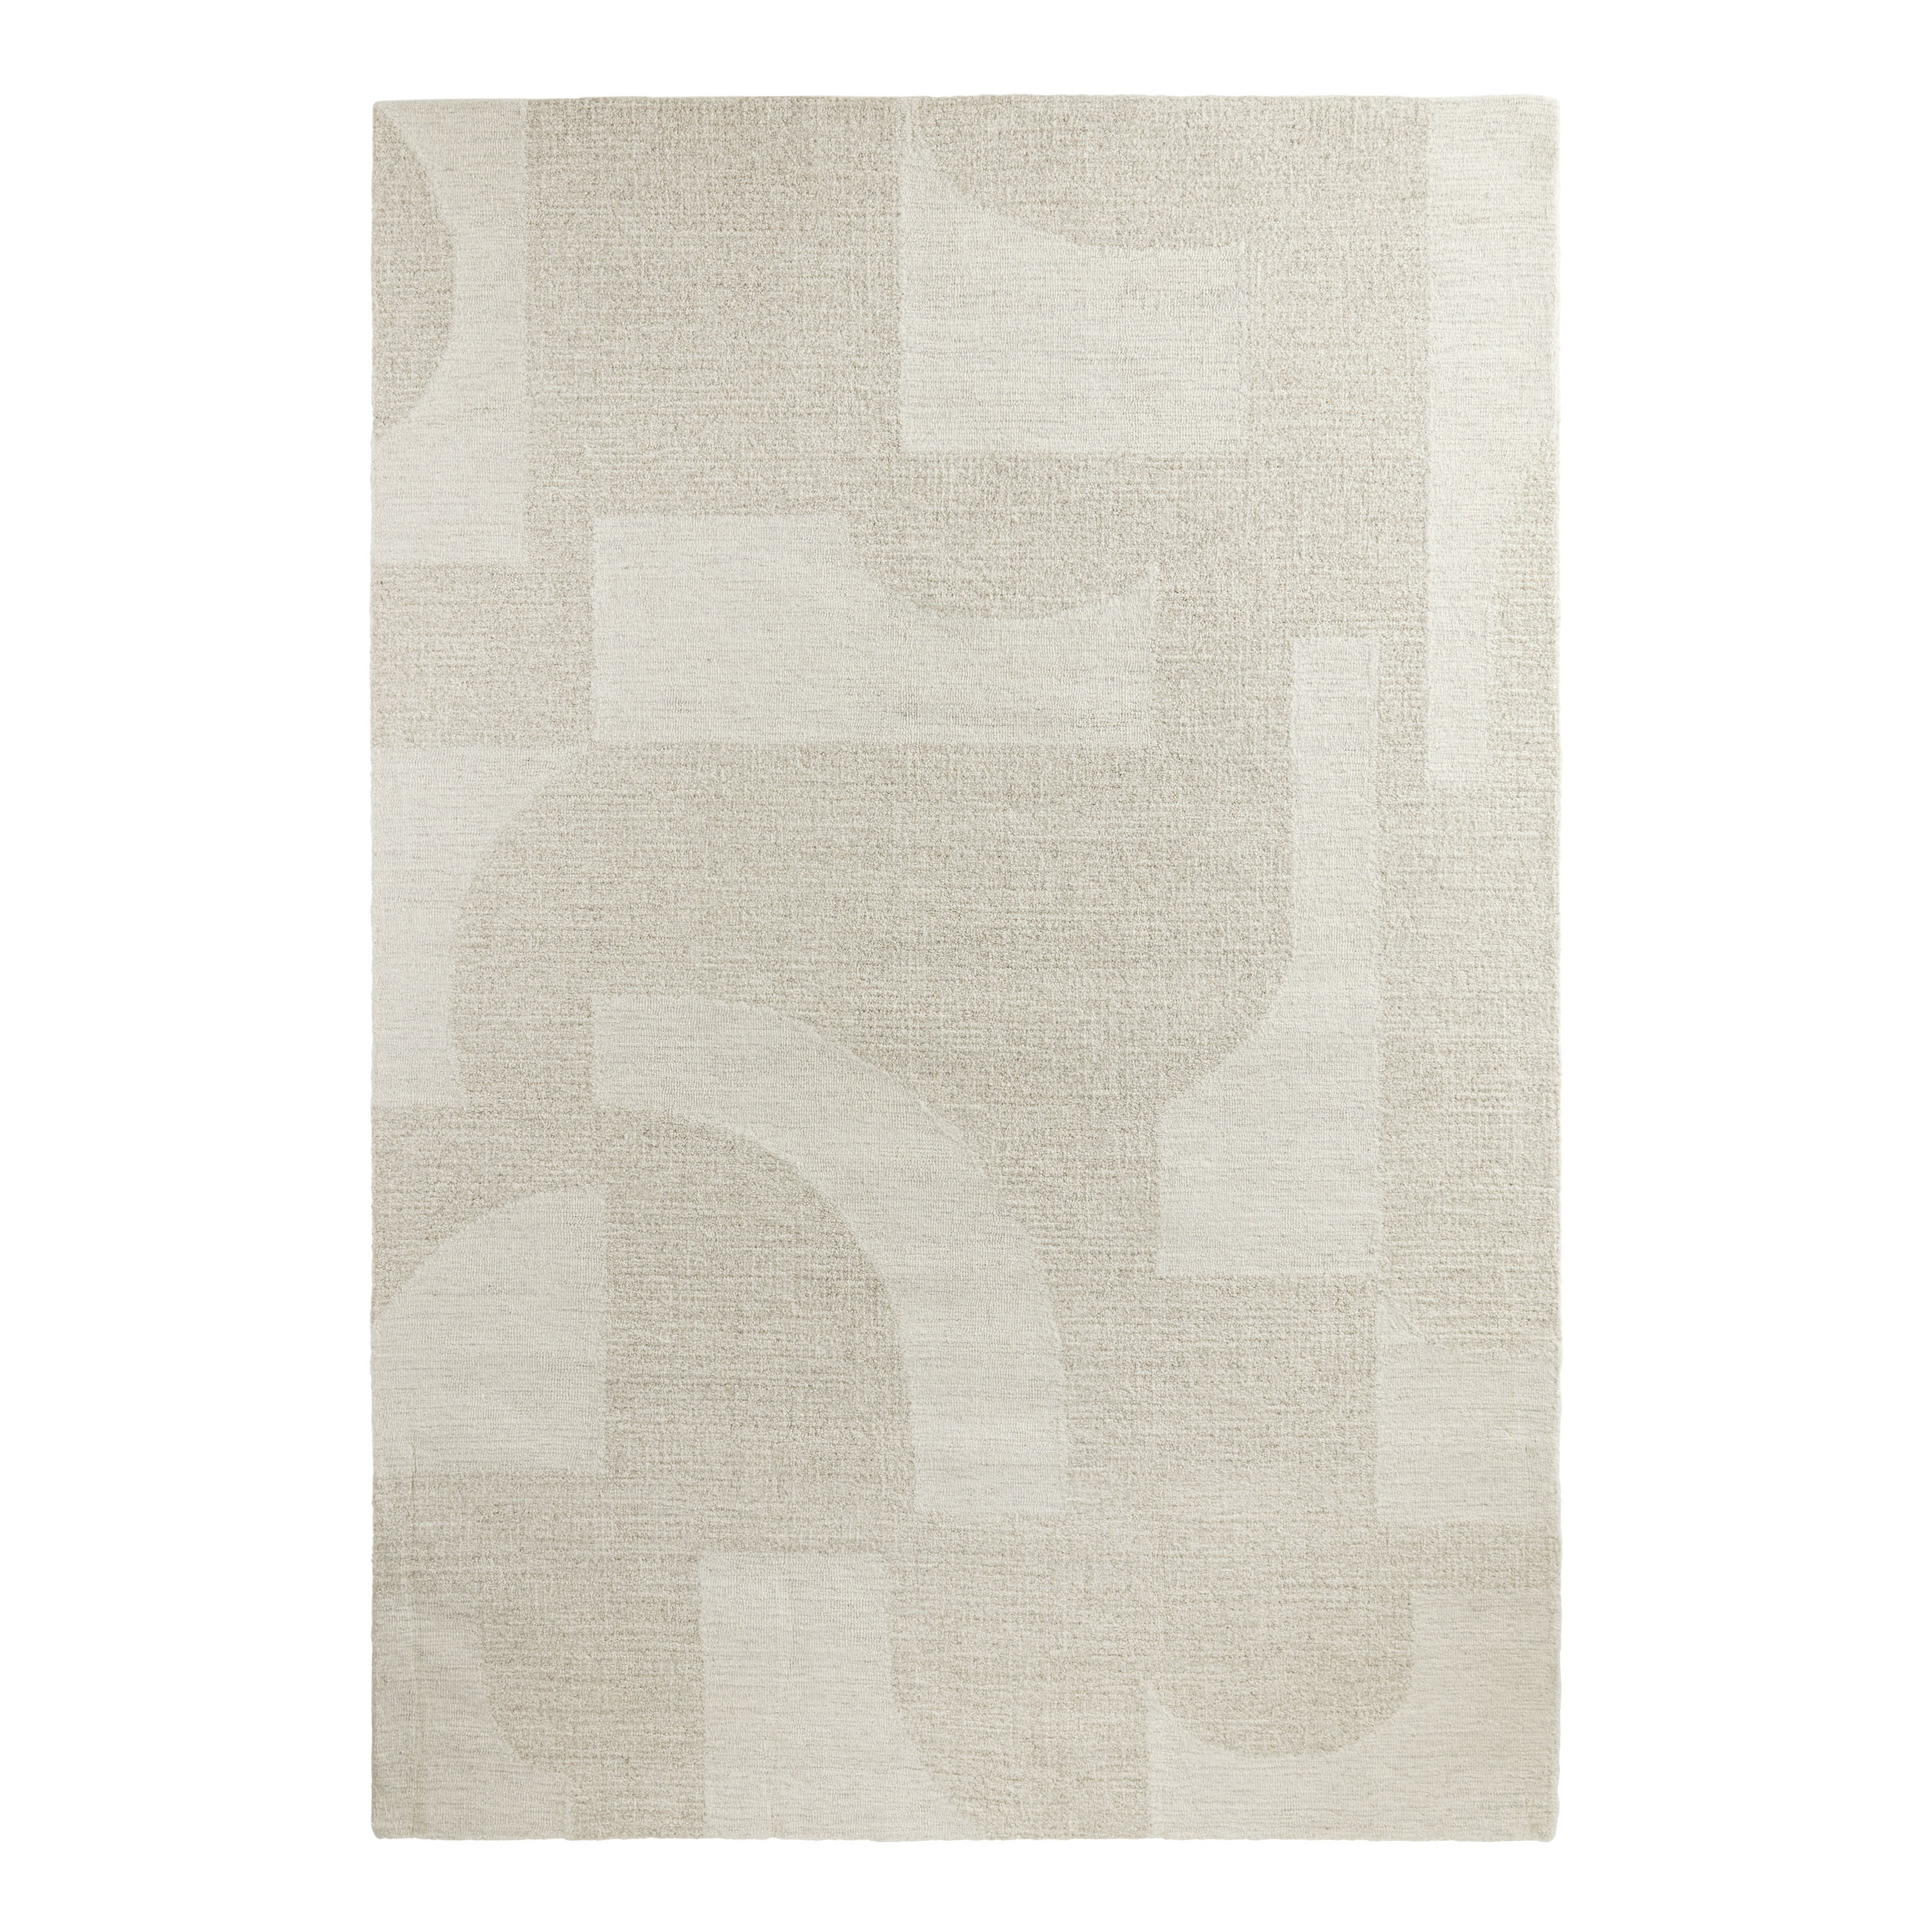 Nomad Undyed Abstract Tufted Wool Area Rug World Market